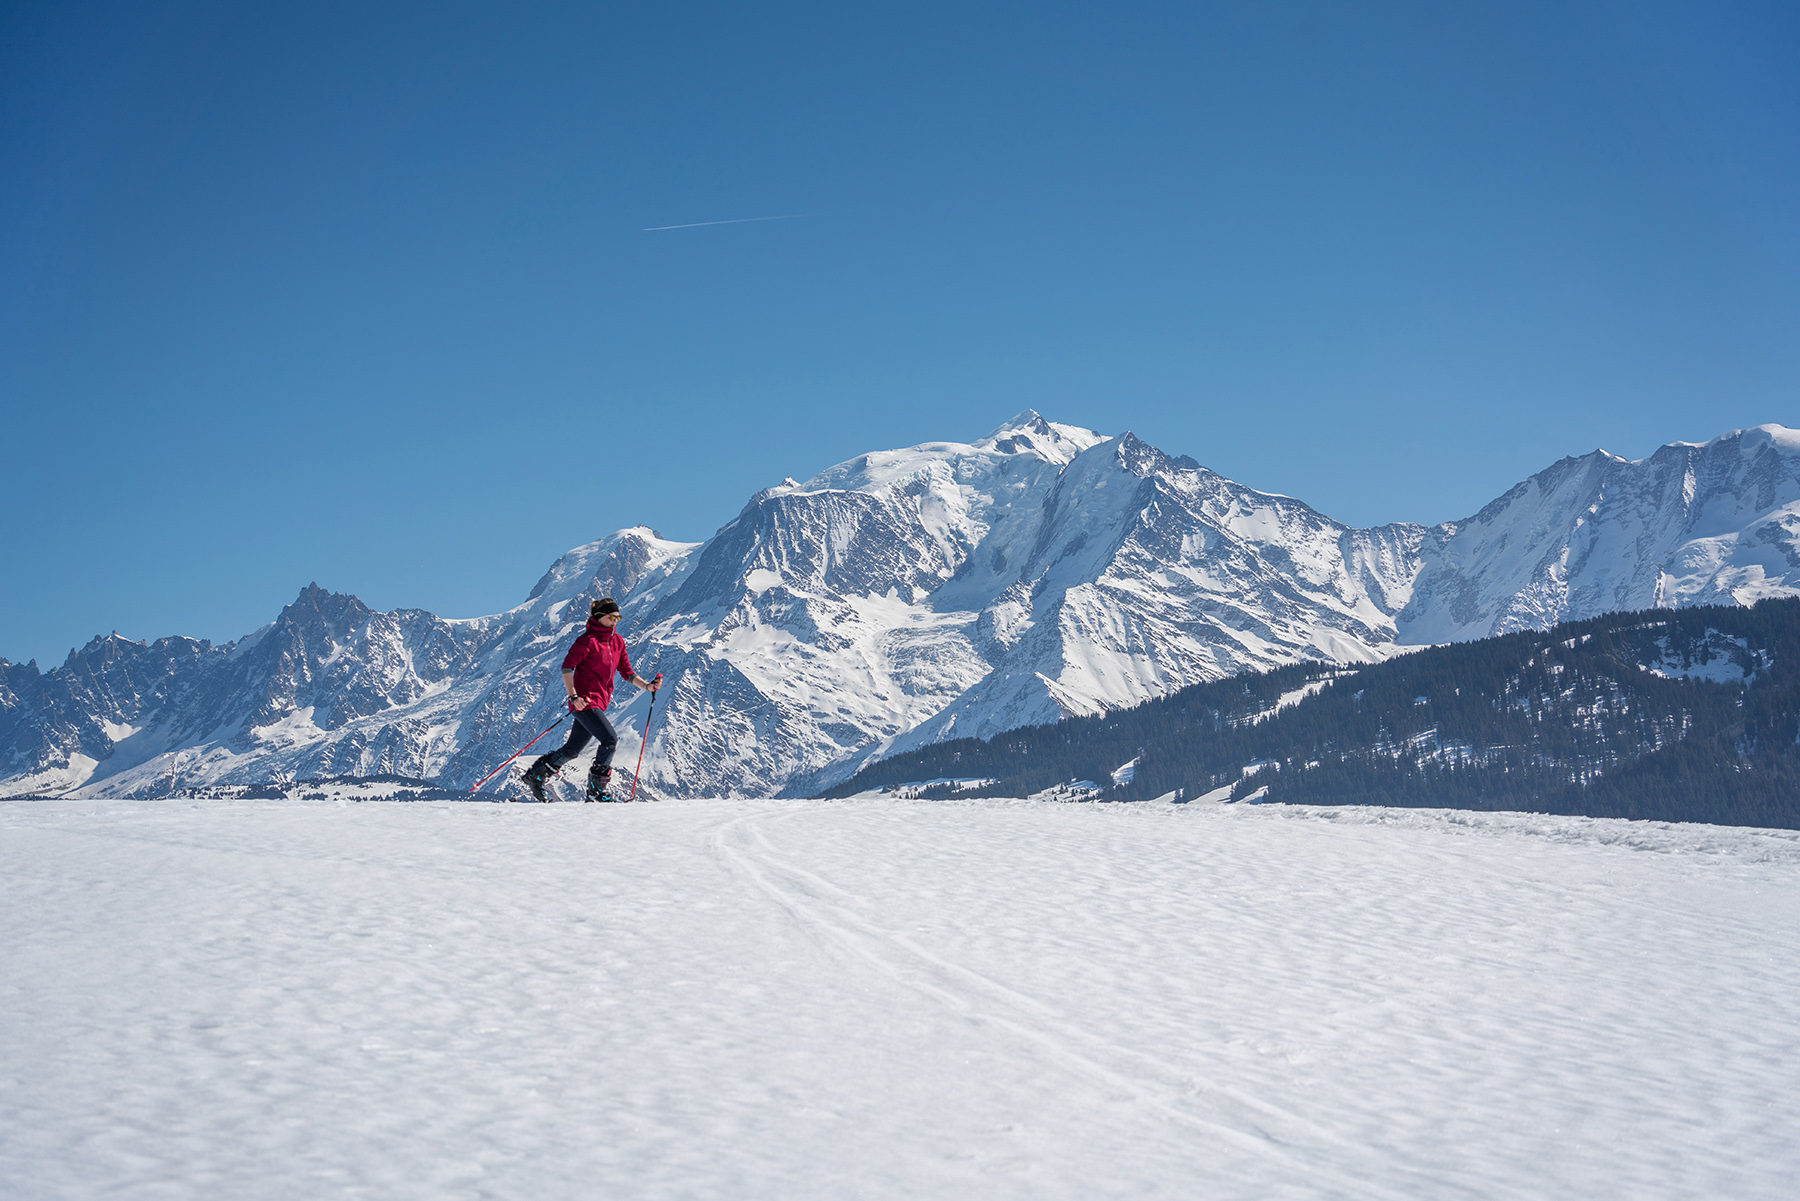 Ski touring in Combloux with a view of Mont-Blanc